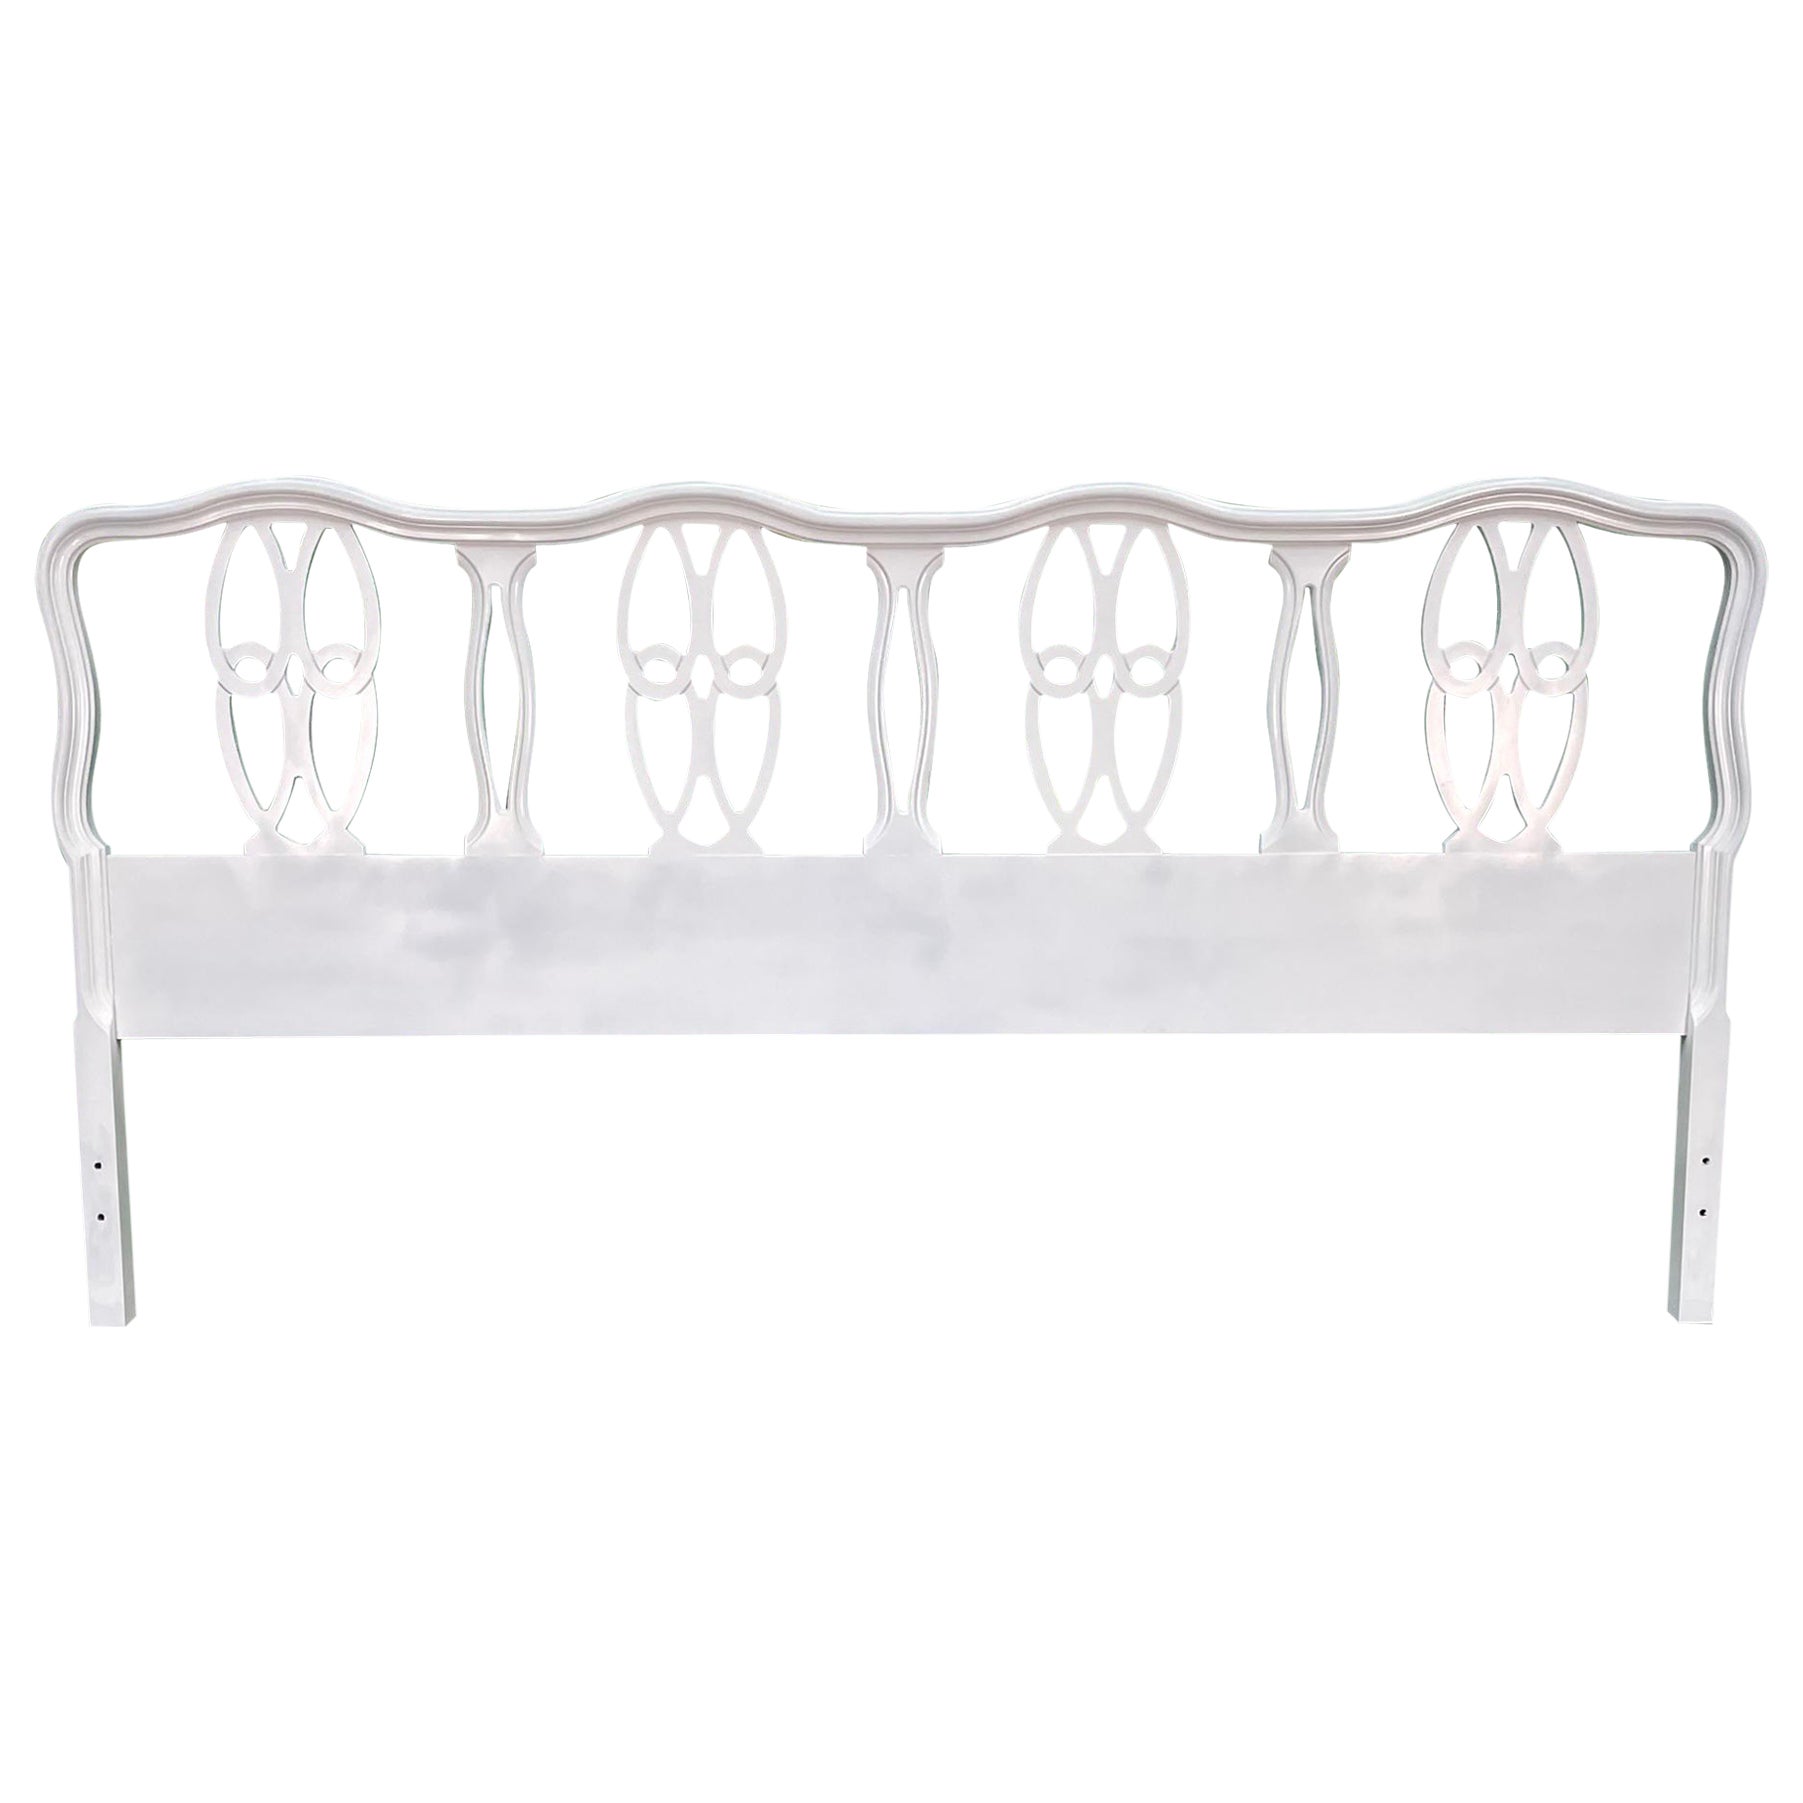 Midcentury Dorothy Draper Style King Bed Headboard For Sale